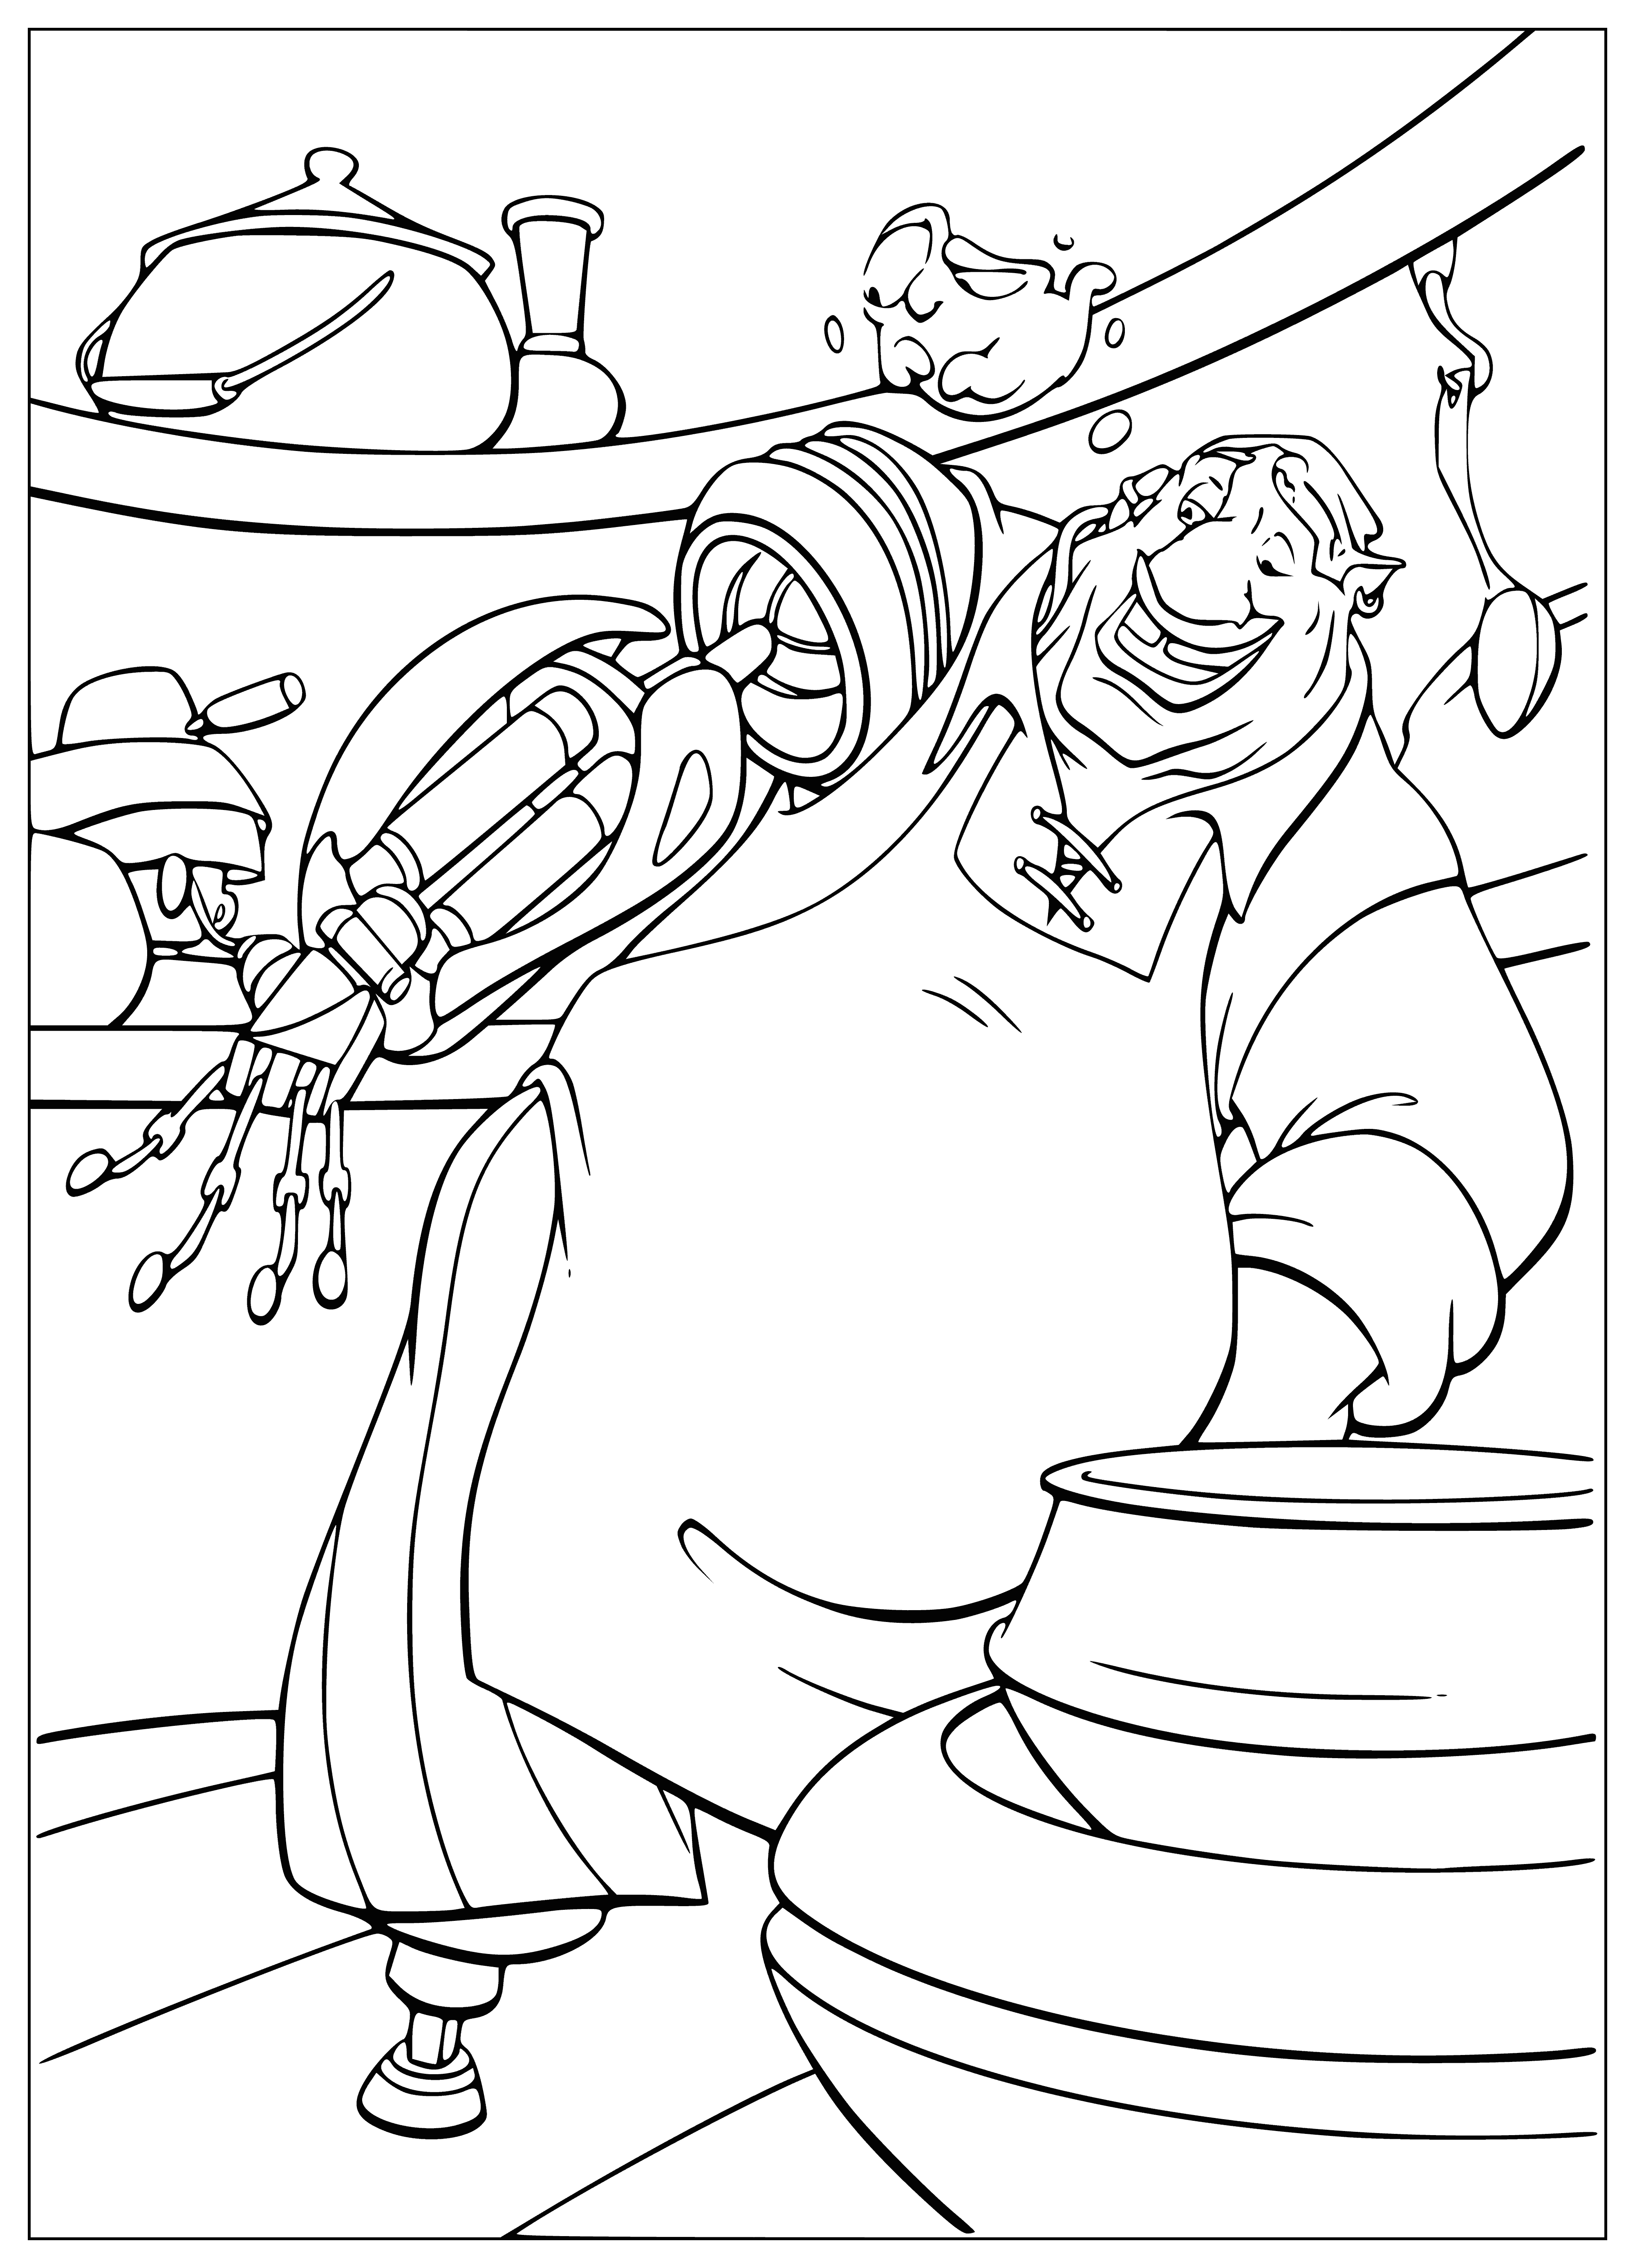 coloring page: A metal cyborg hunches over a computer, eyes glowing red and claws tapping on the keyboard.